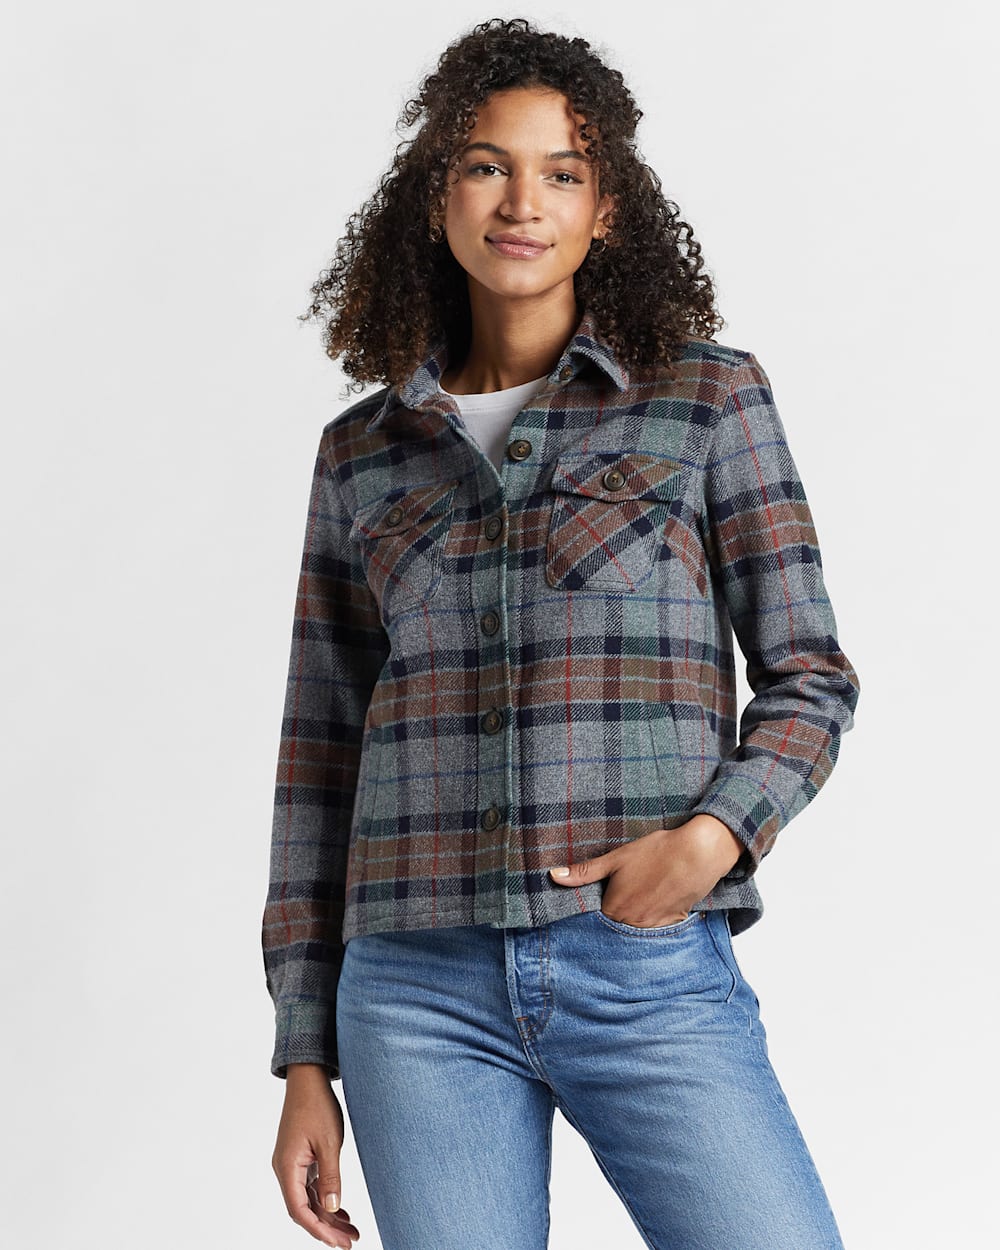 ALTERNATE VIEW OF WOMEN'S ROSLYN WOOL JACKET IN GREY MIX PLAID image number 4